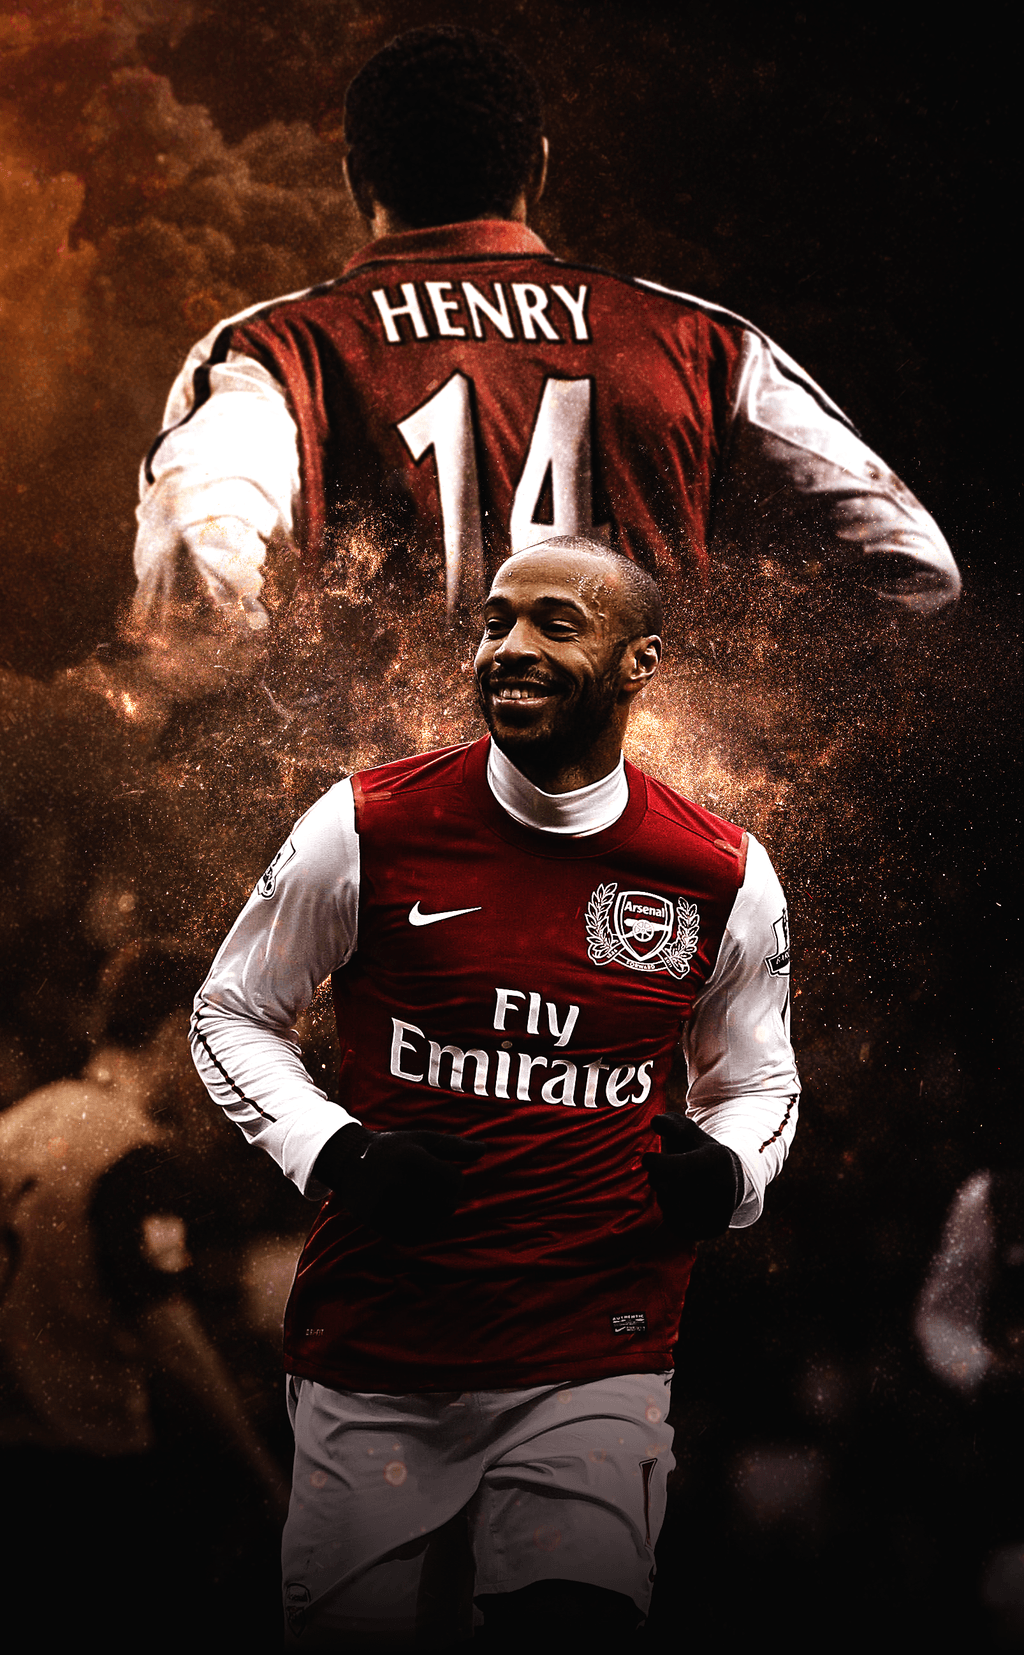 Thierry Henry mobile wallpaper